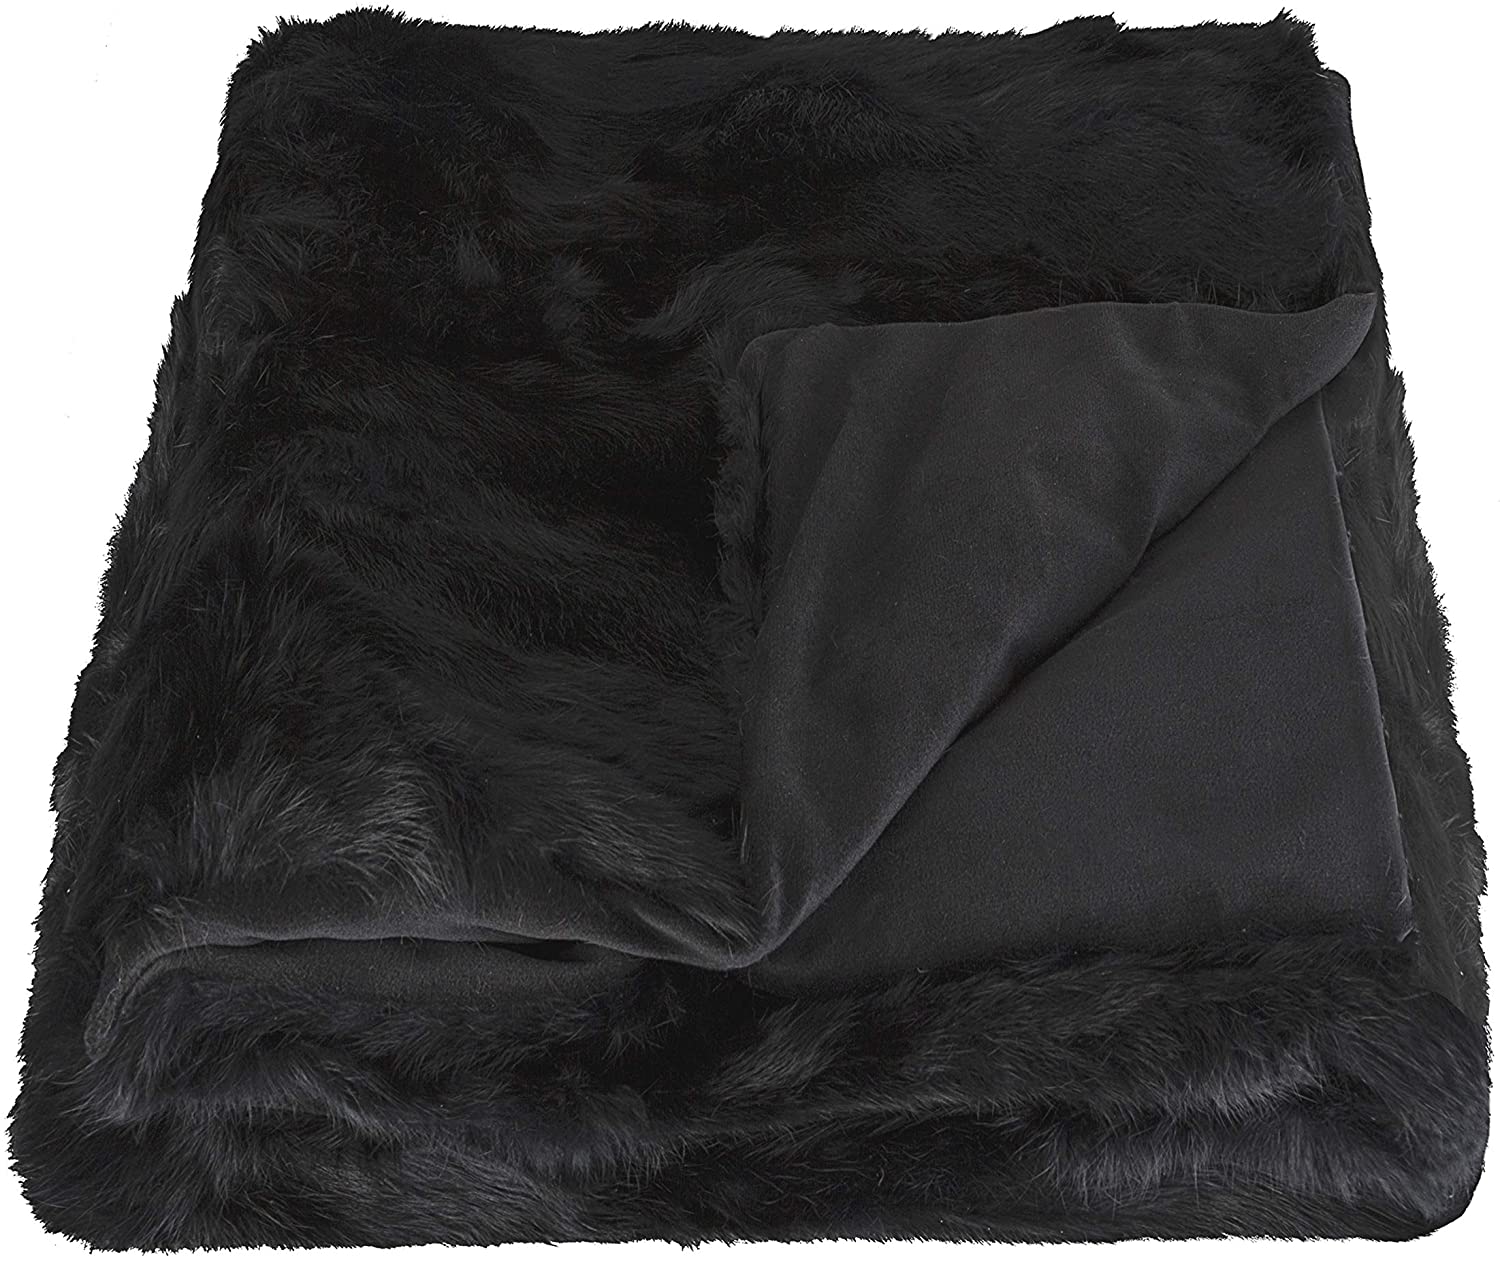 Natural Thick and Lush Pile Soft Microsuede Backing Genuine Rabbit Fur Throw Blanket, Black, 50 in x 60 in